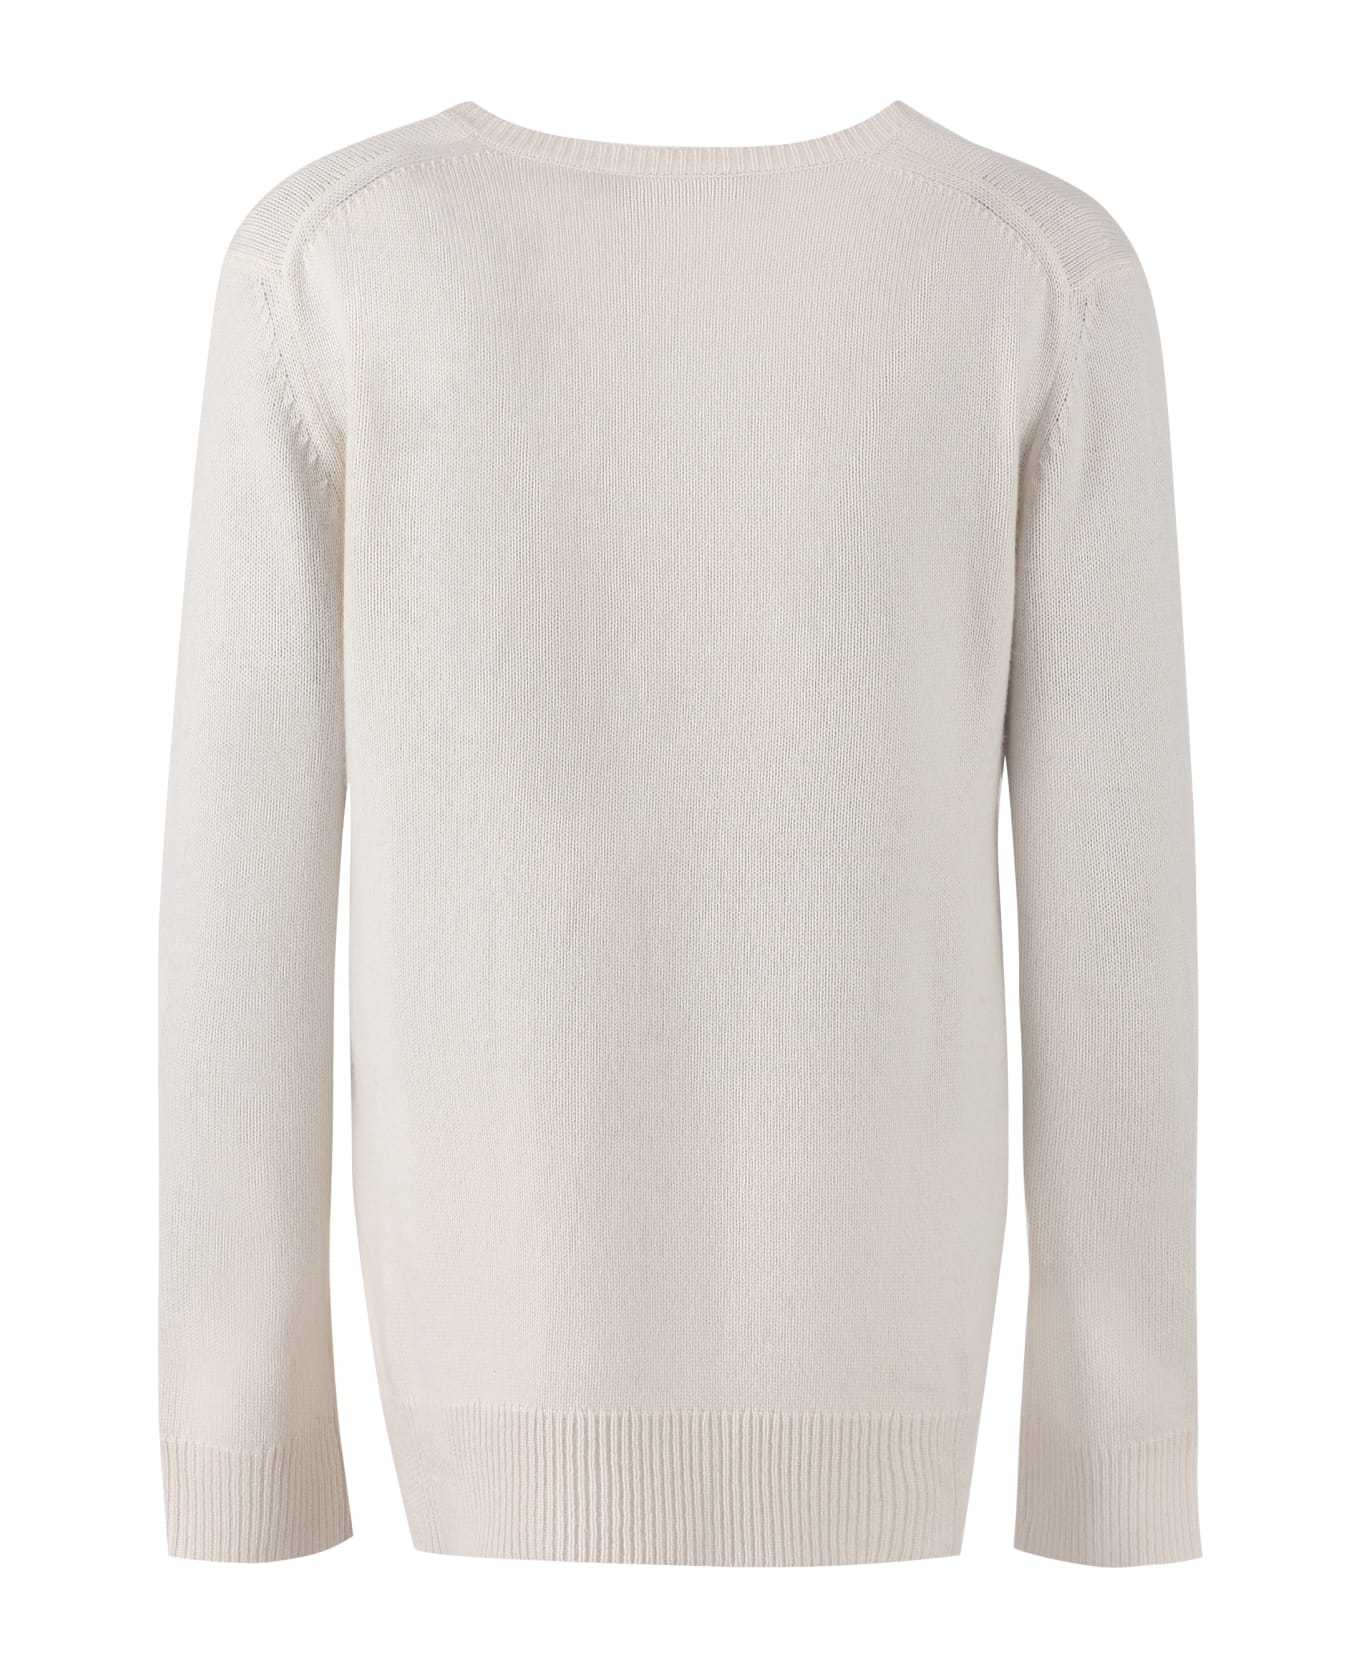 'S Max Mara Verona Wool And Cashmere Pullover - Beige